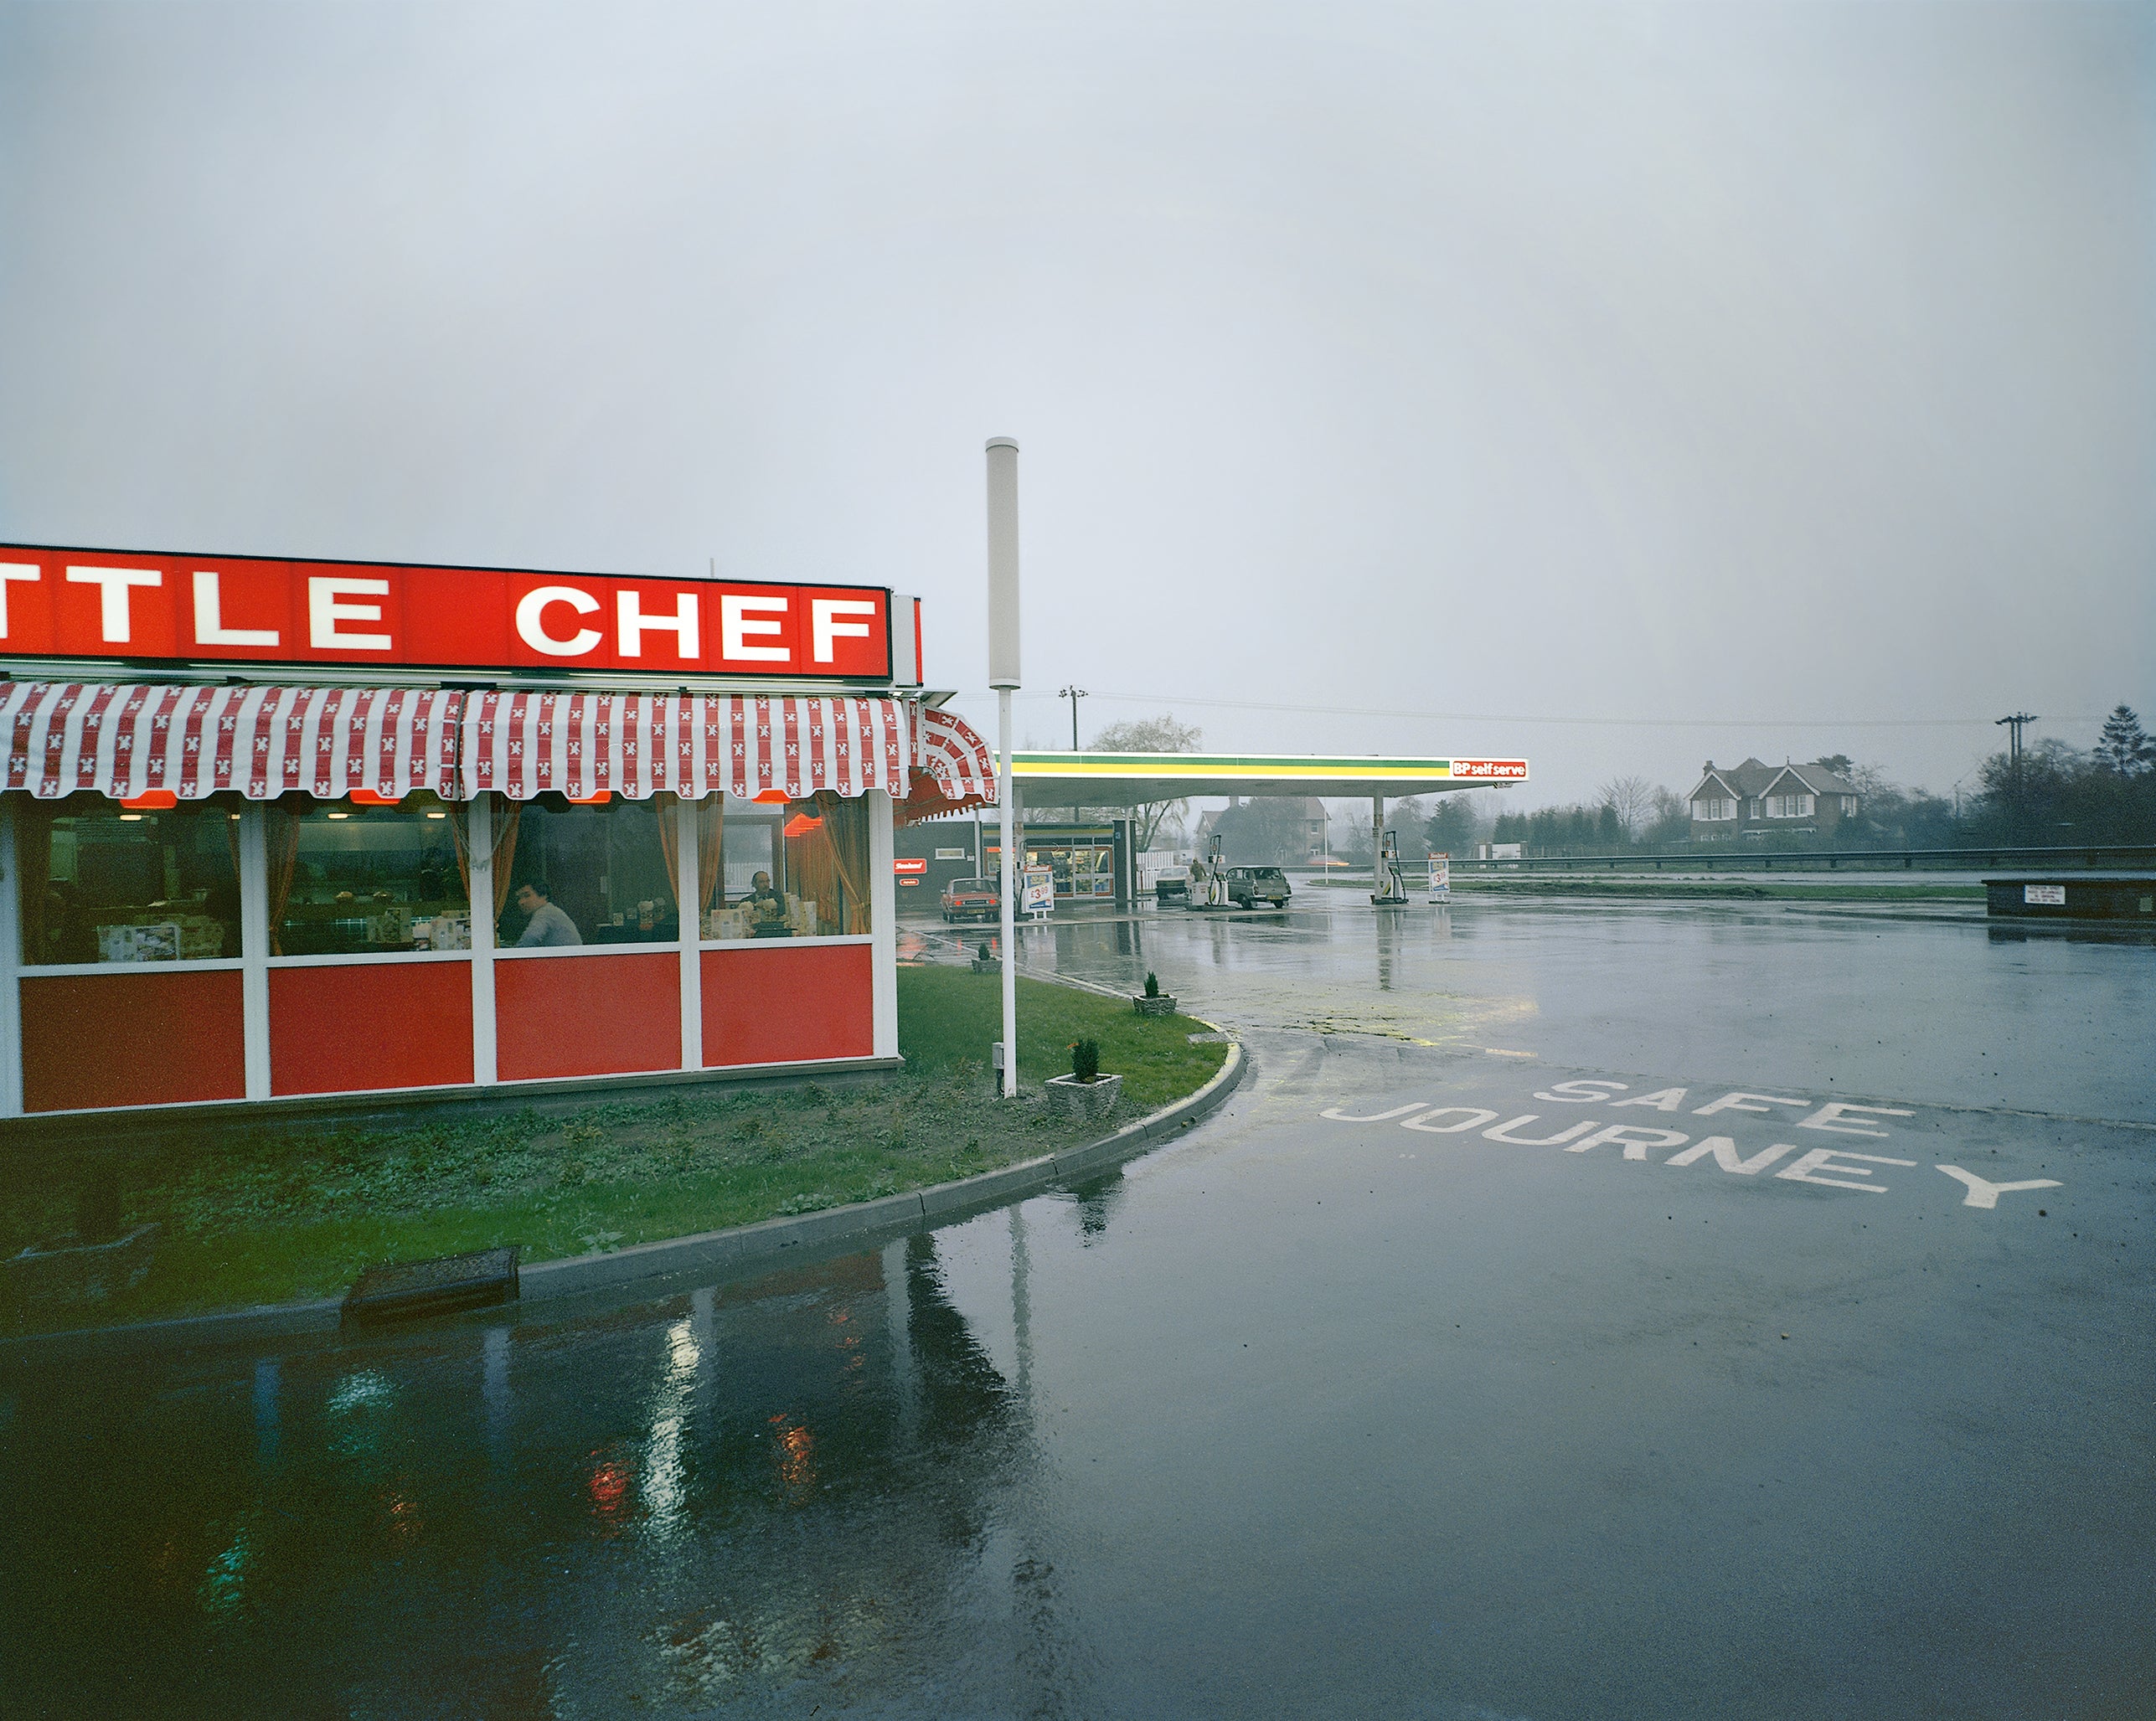 Little Chef in Rain, St. Neots, Cambridgeshire, May, 1982